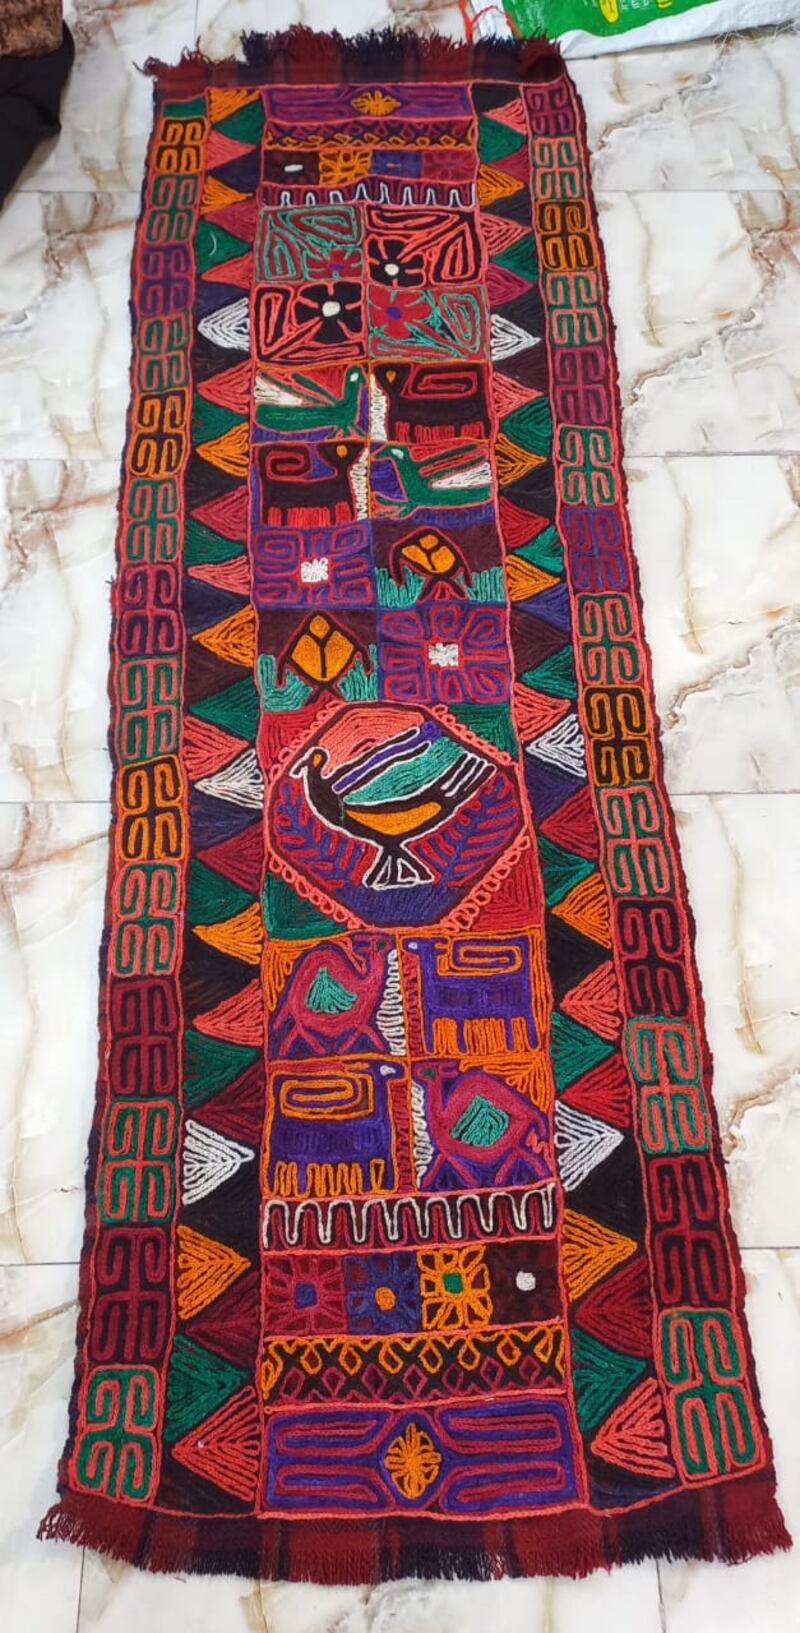 The kilims can be purely decorative, or used as floor coverings and even as blankets